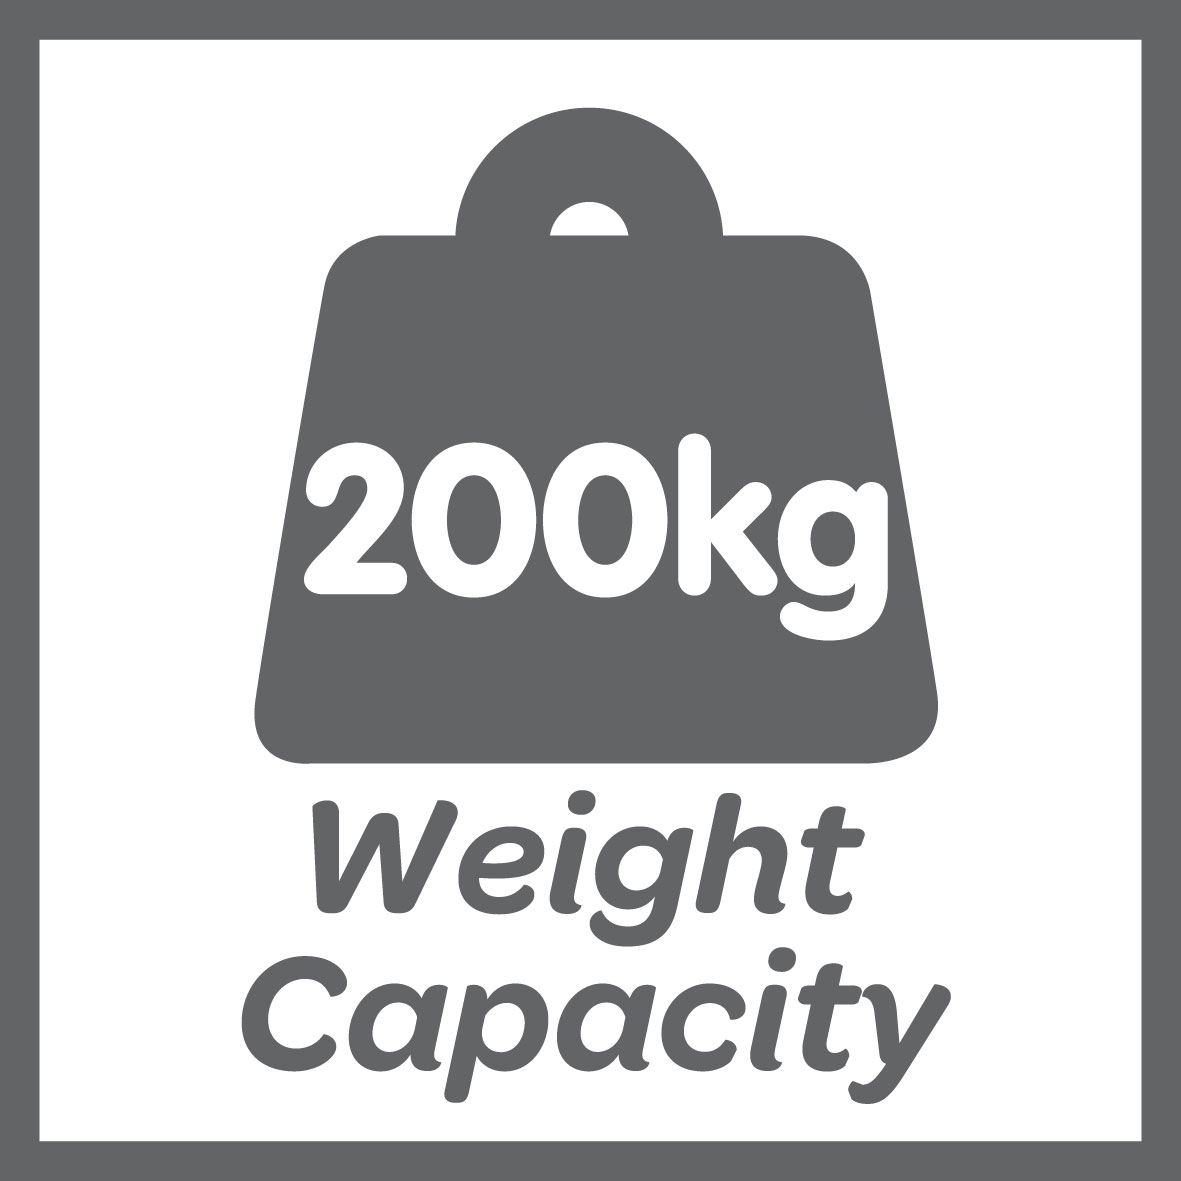 This product has a 200kg weight limit